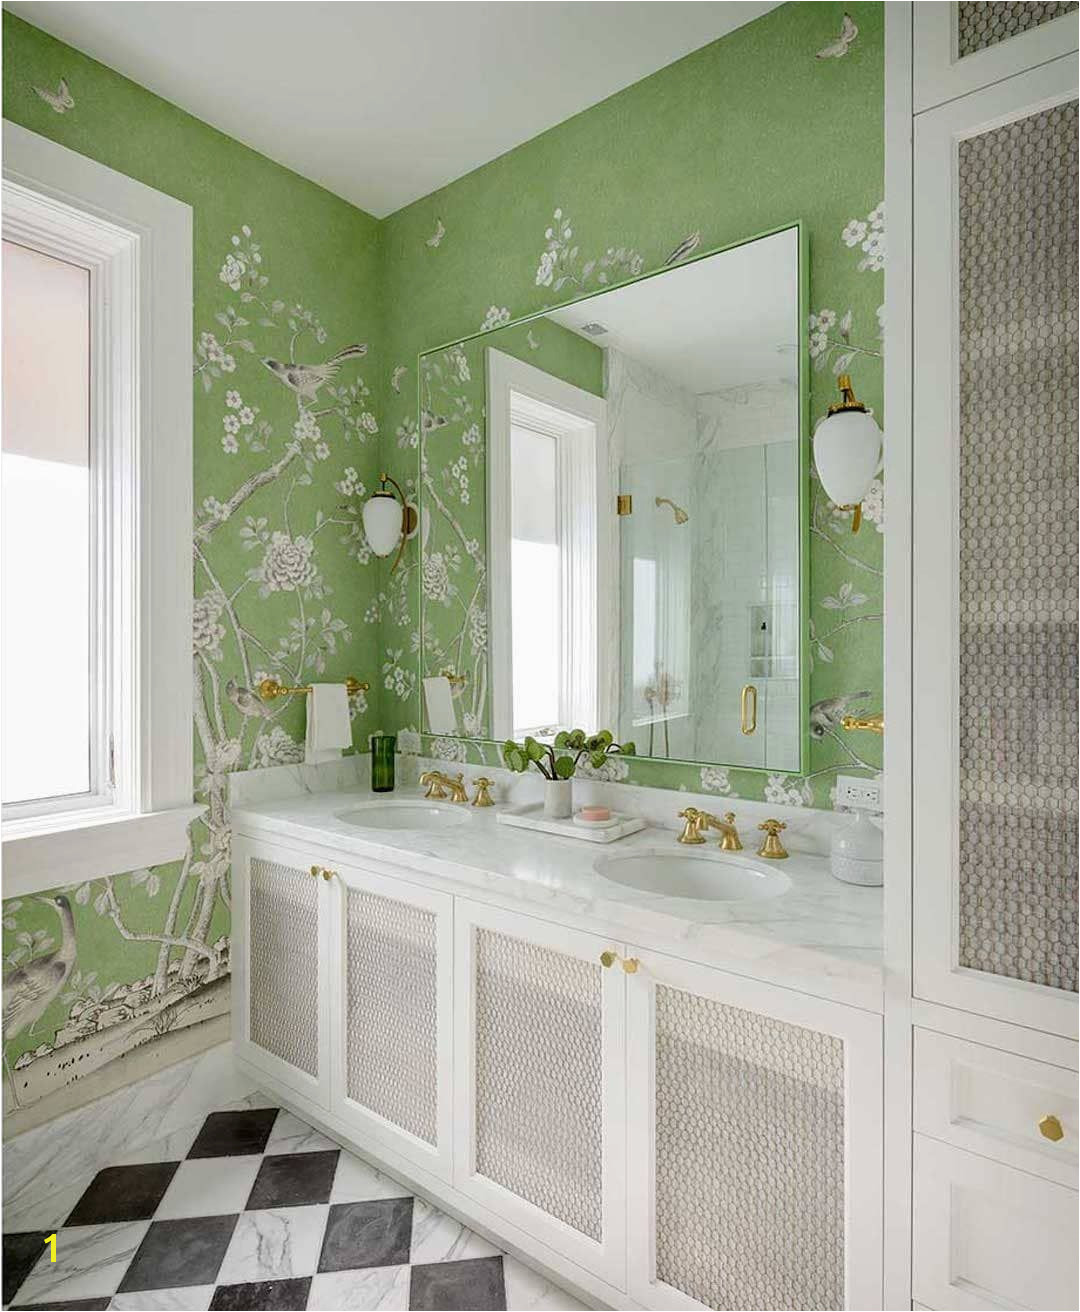 This bathroom Designed by John K Anderson jkadesign and featuring our ChinoisPalais wallpaper it s pure perfection schustagram